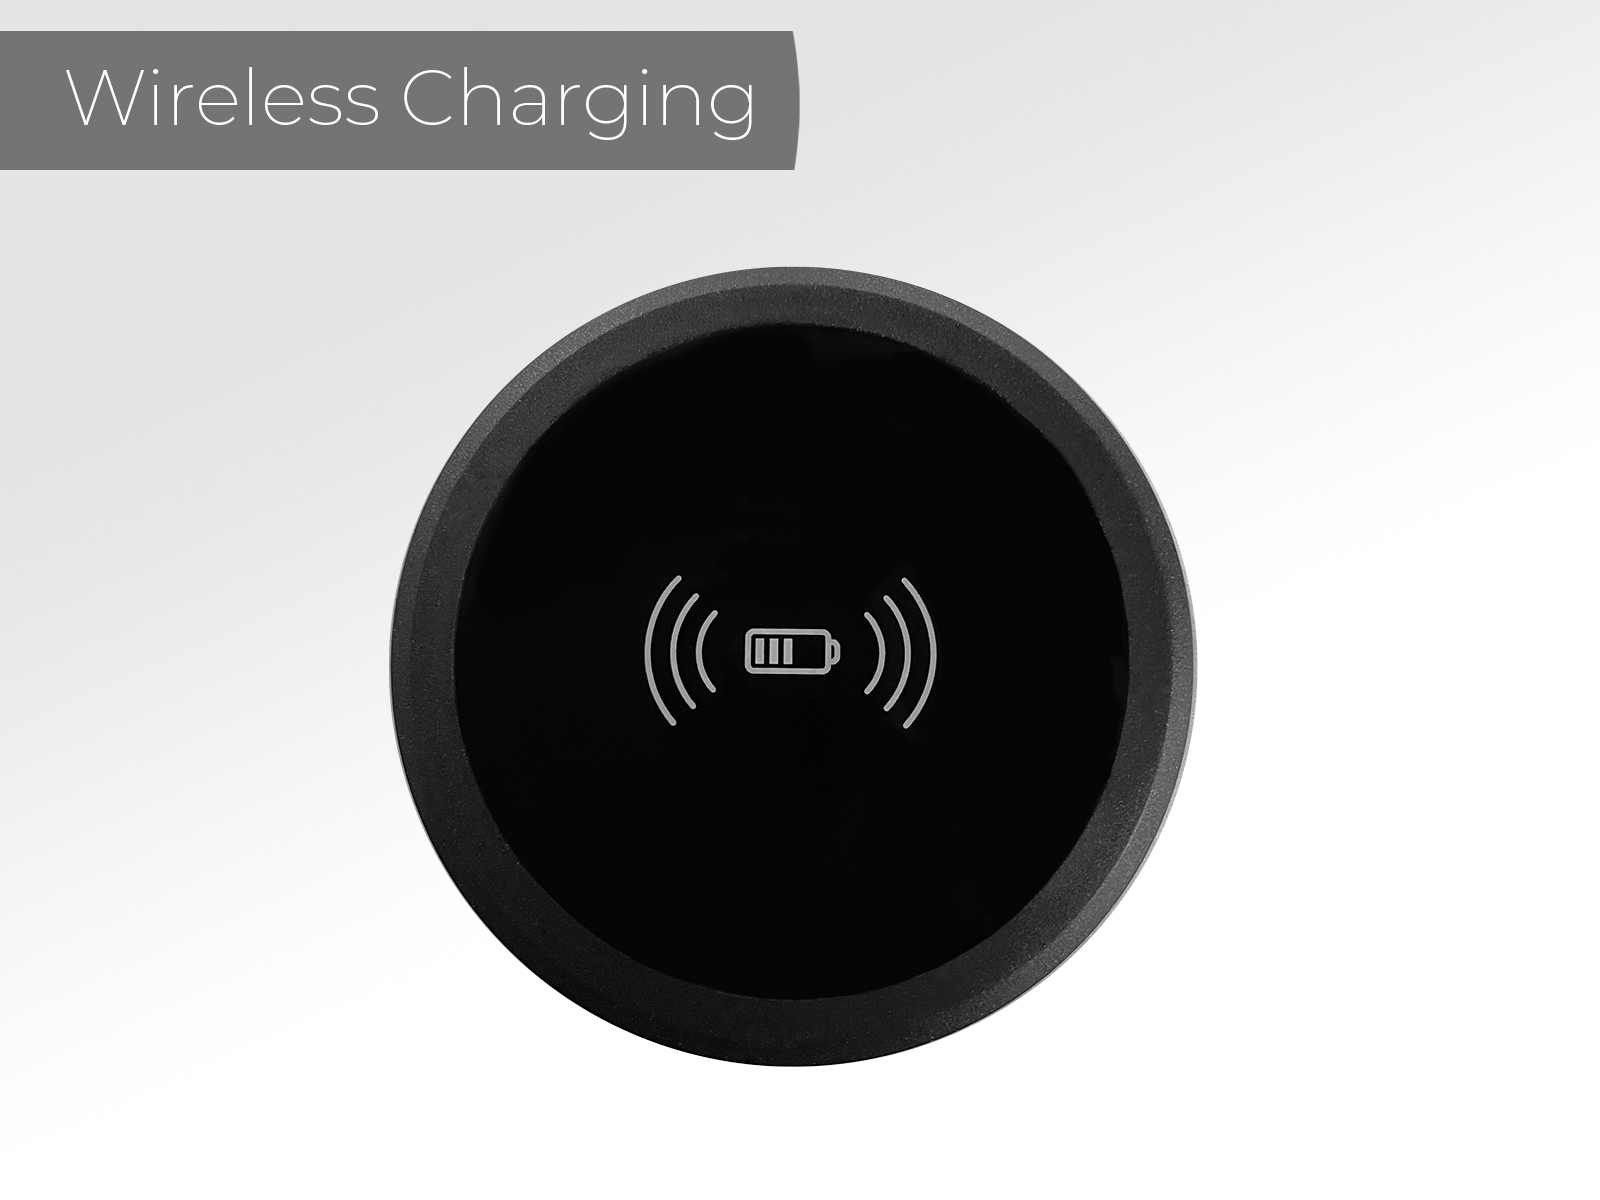 Wireless Charging Pad -- View 1